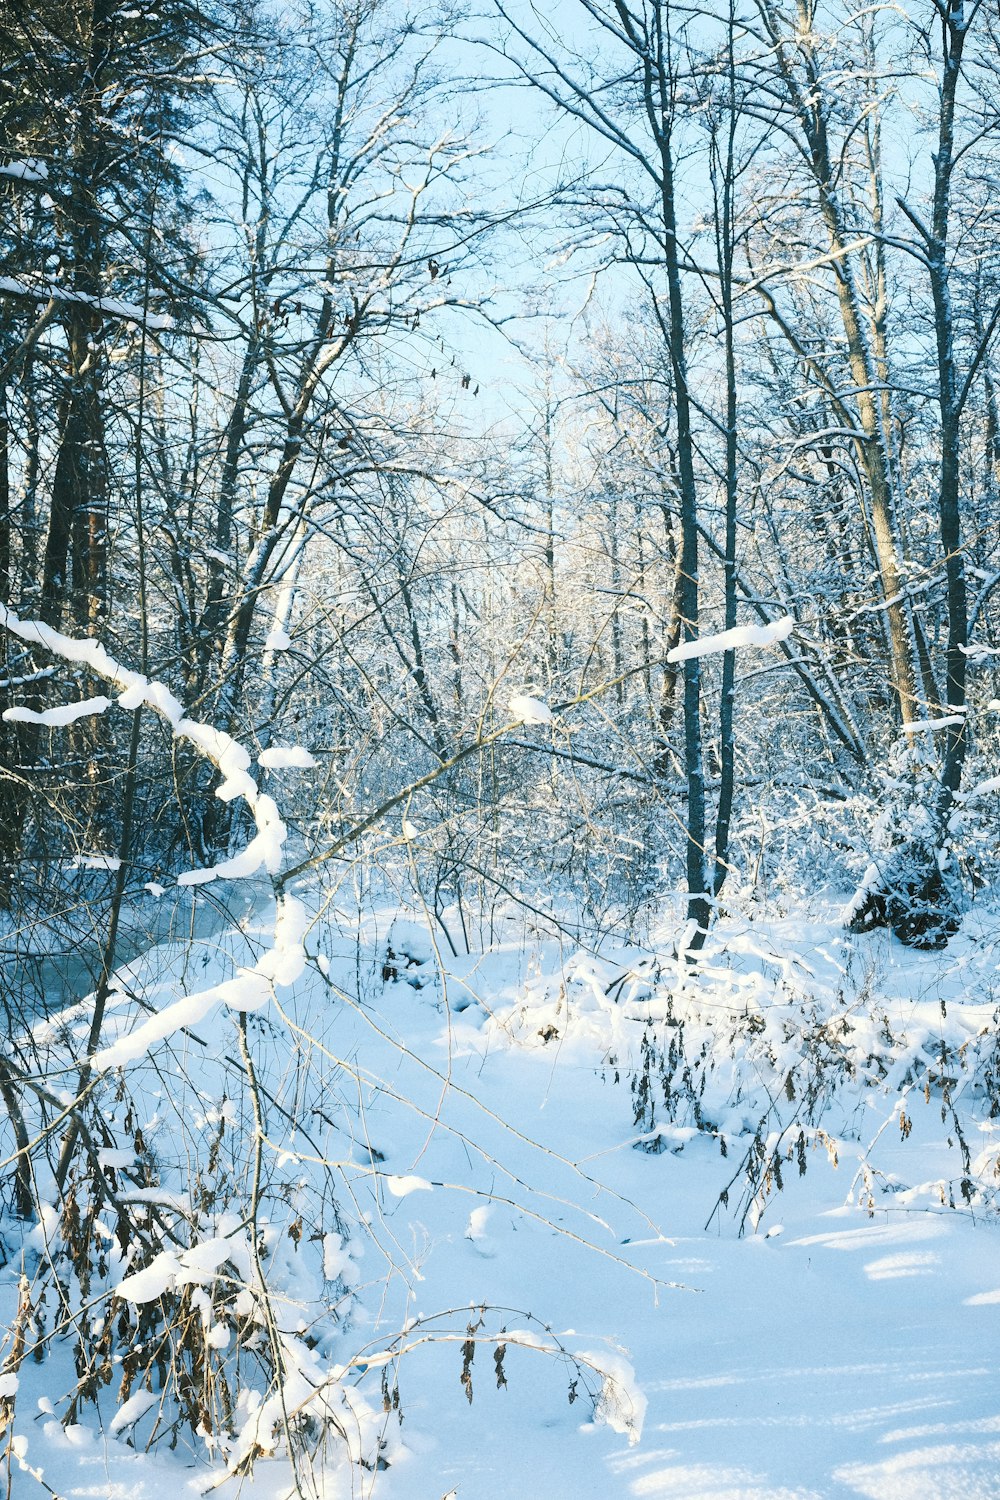 a snowy path through a forest with lots of trees